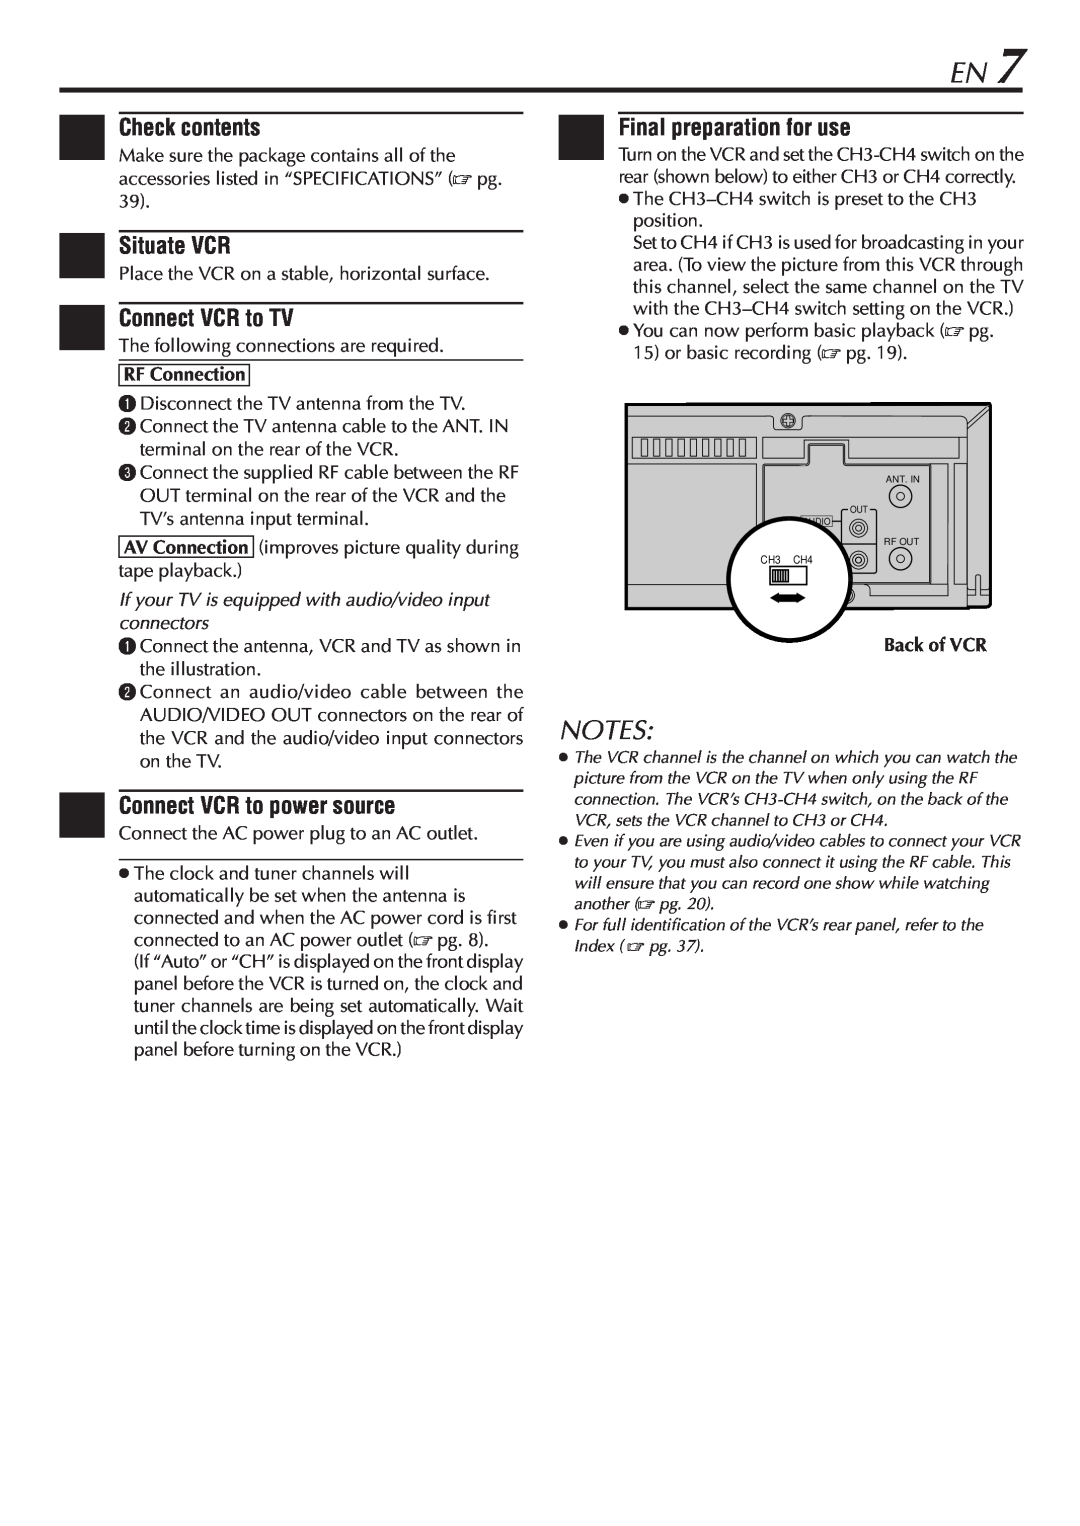 JVC HR-A47U manual Check contents, Situate VCR, Connect VCR to TV, 5Final preparation for use 